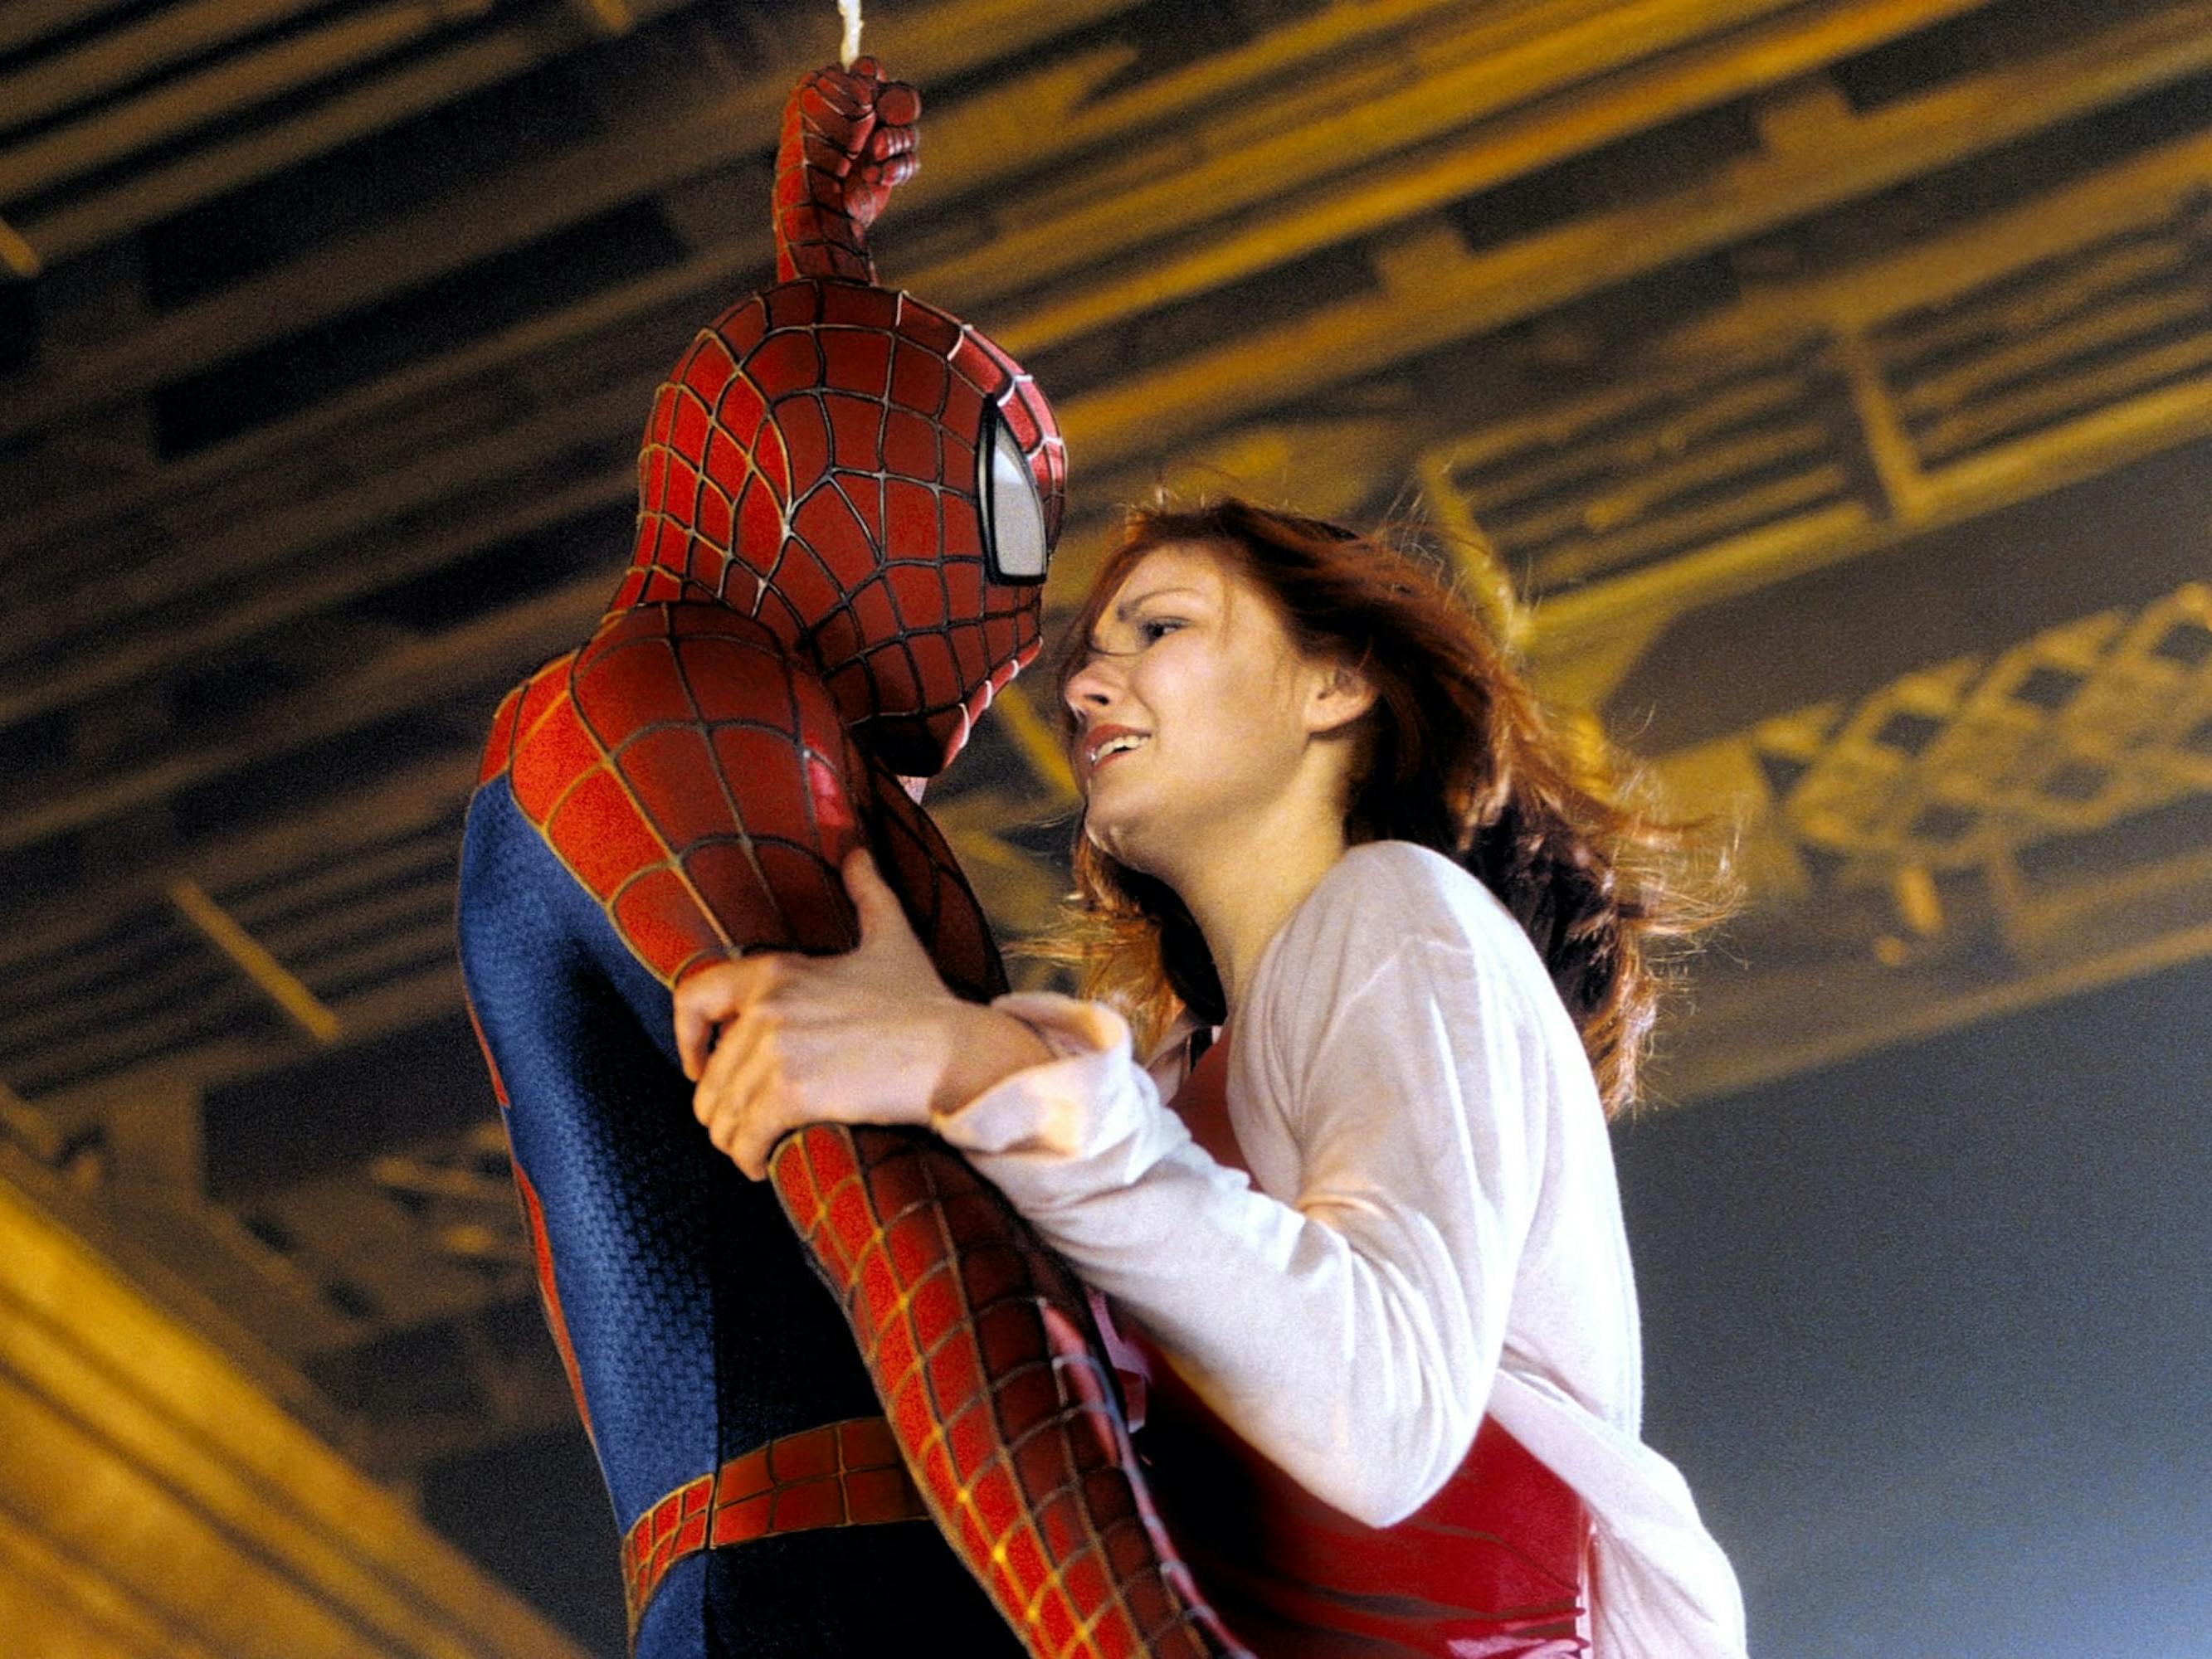 Spider-Man (Tobey Maguire) and Mary Jane Watson (Kirsten Dunst) stand together. Maguire wears his spidey suit, and Dunst wears a pink t-shirt.